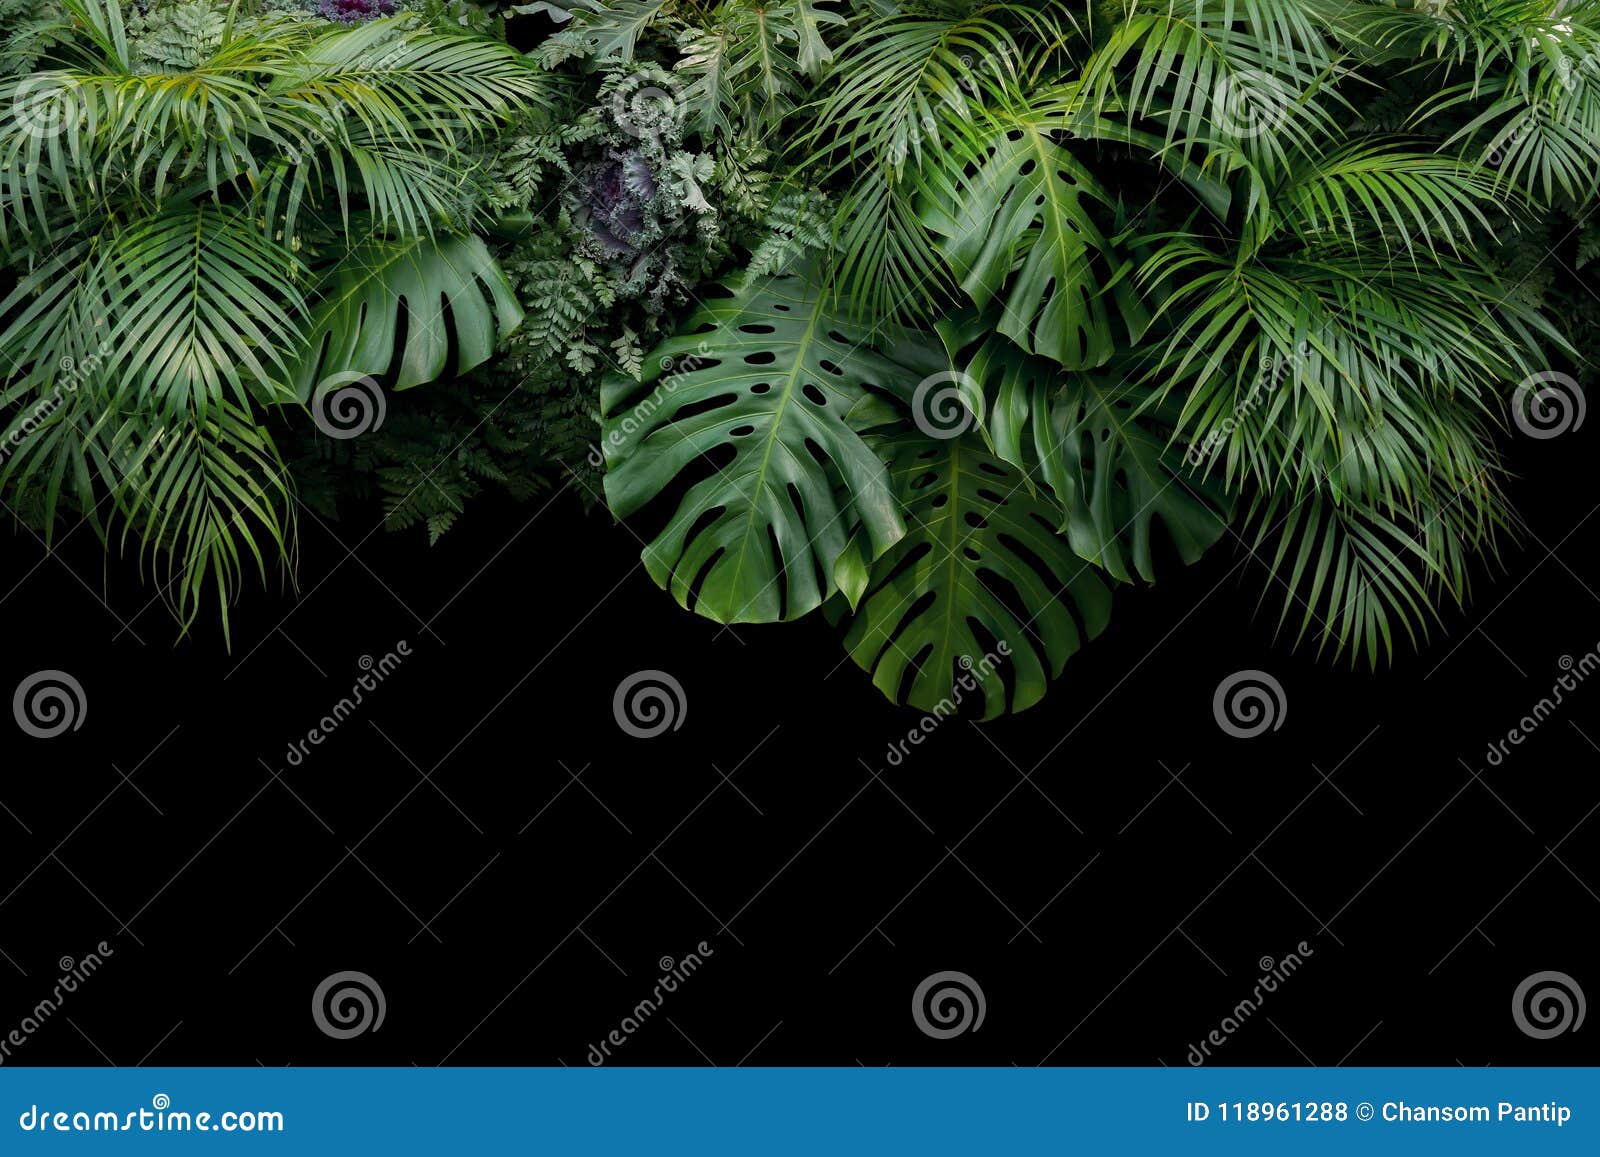 monstera, fern, and palm leaves tropical rainforest foliage plan